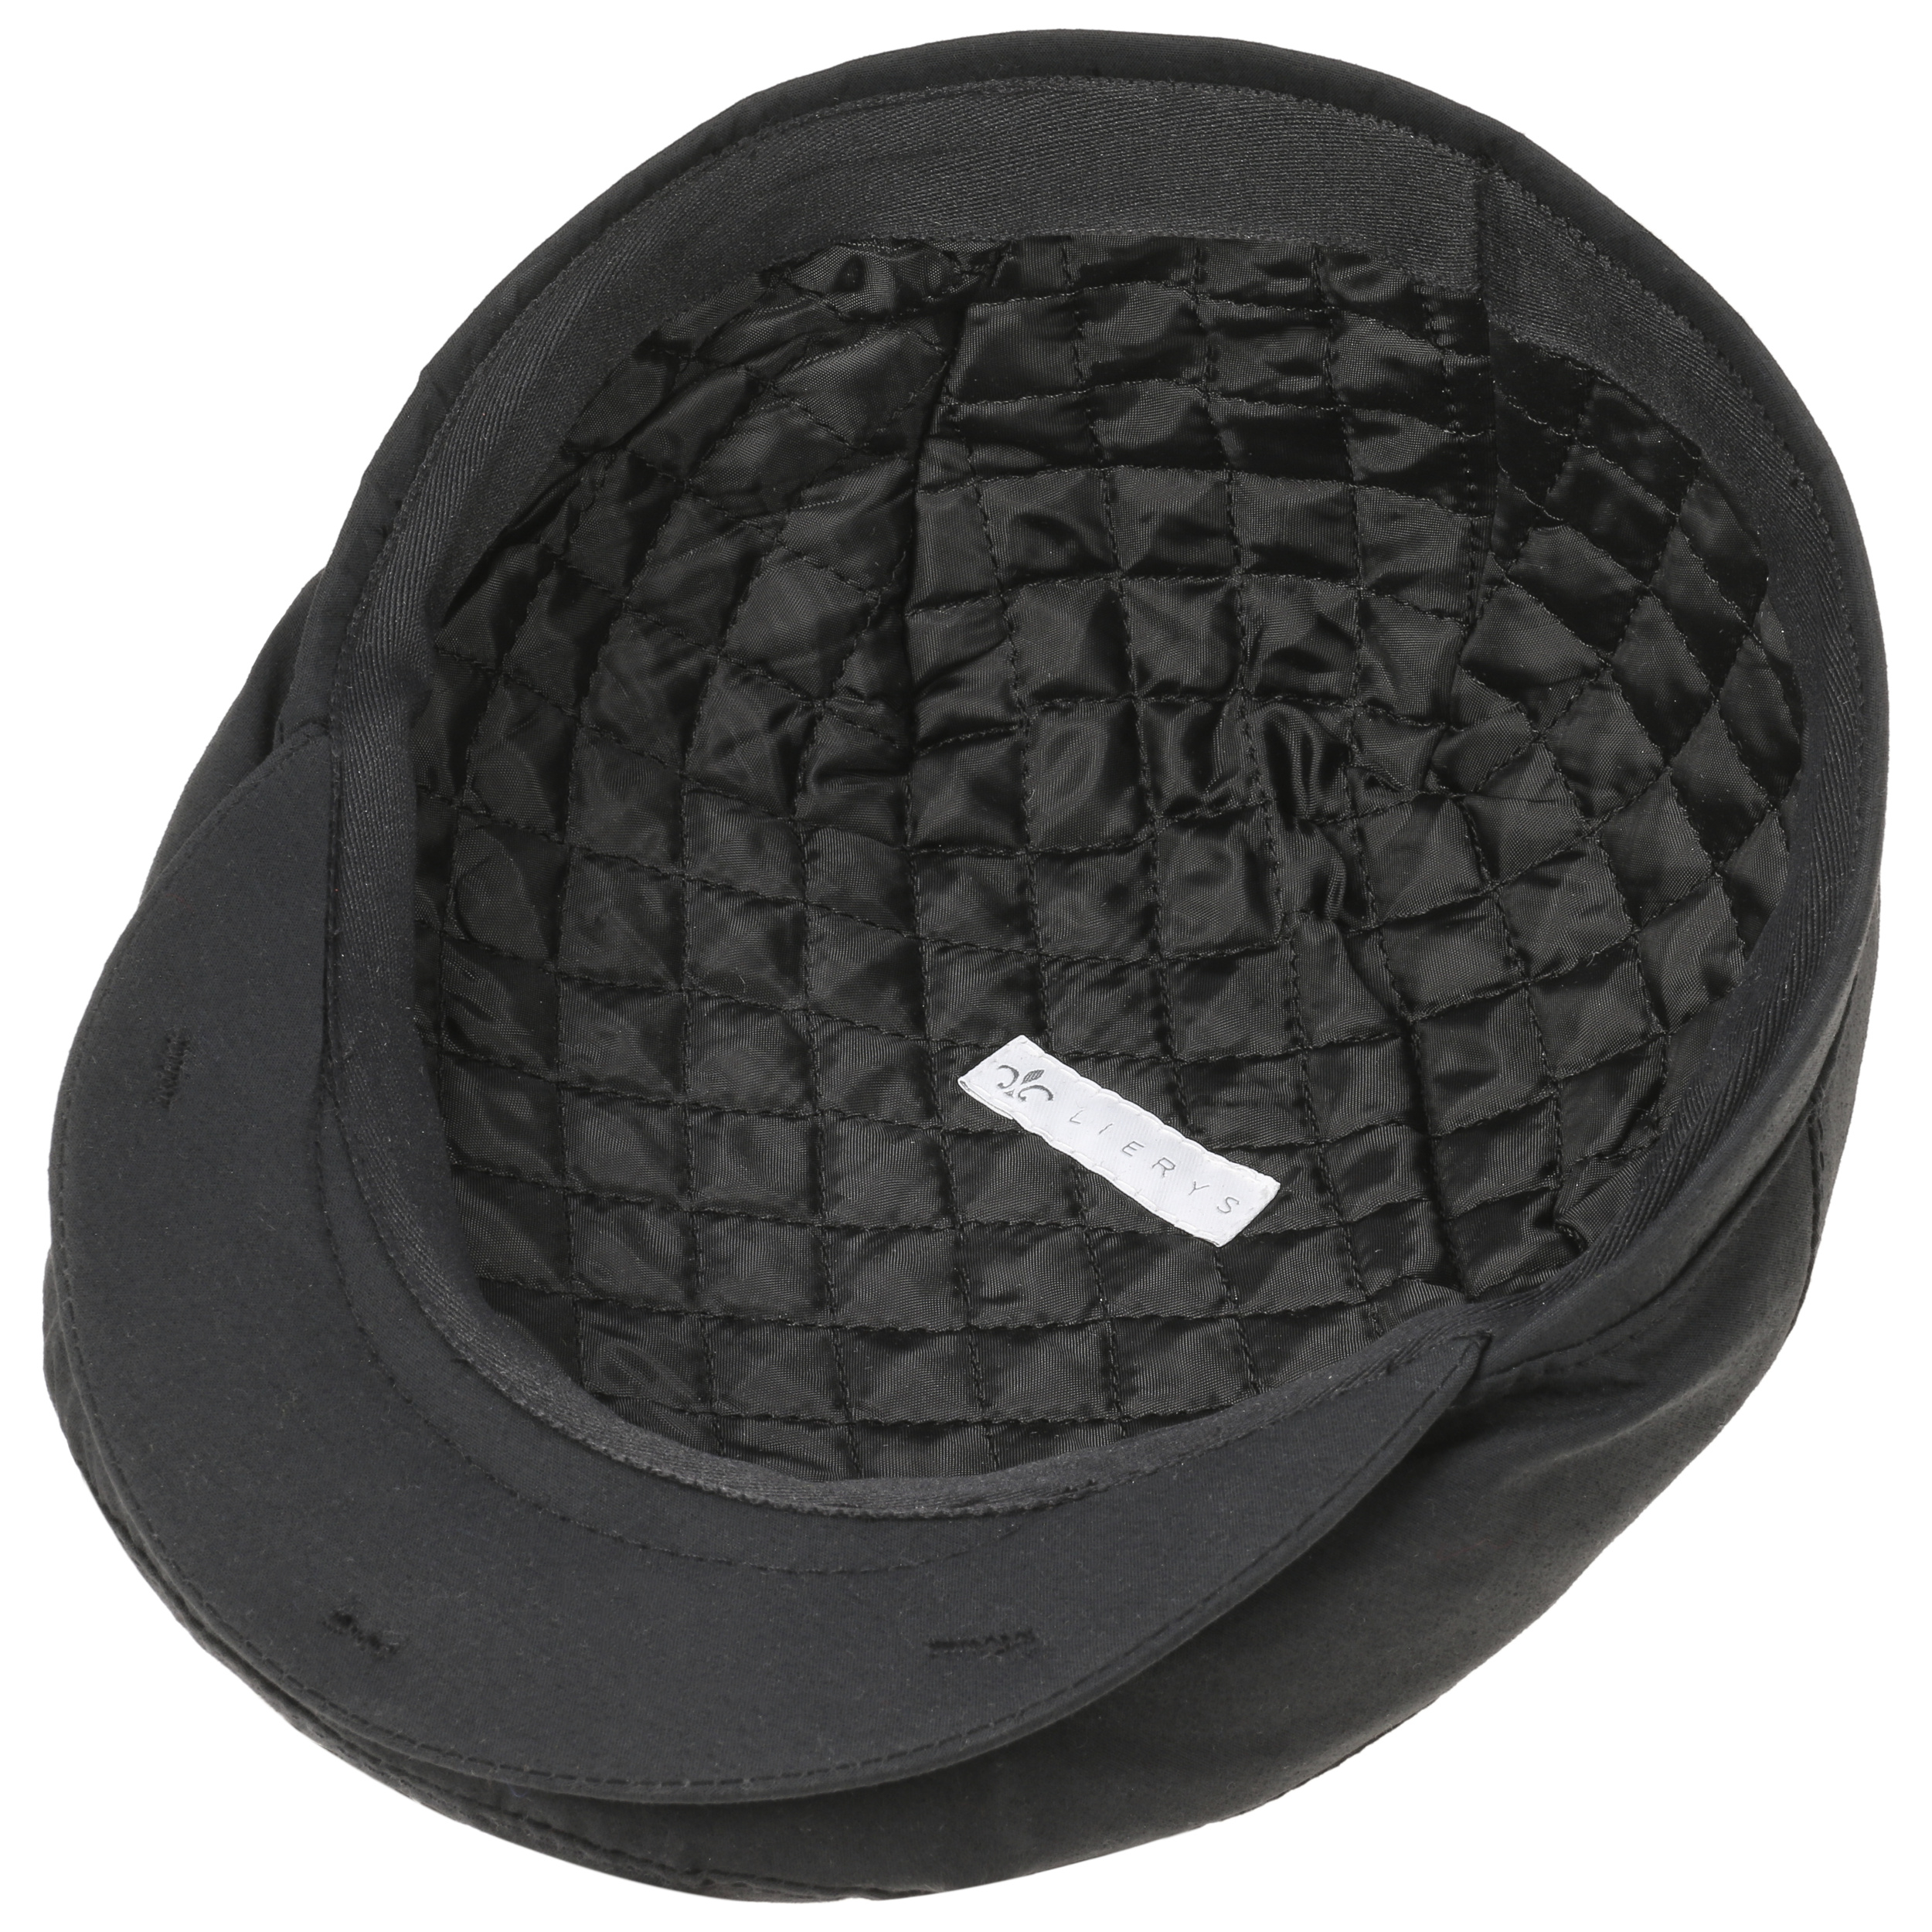 Gore-Tex Protect Sport Flat Cap by Lierys - 72,95